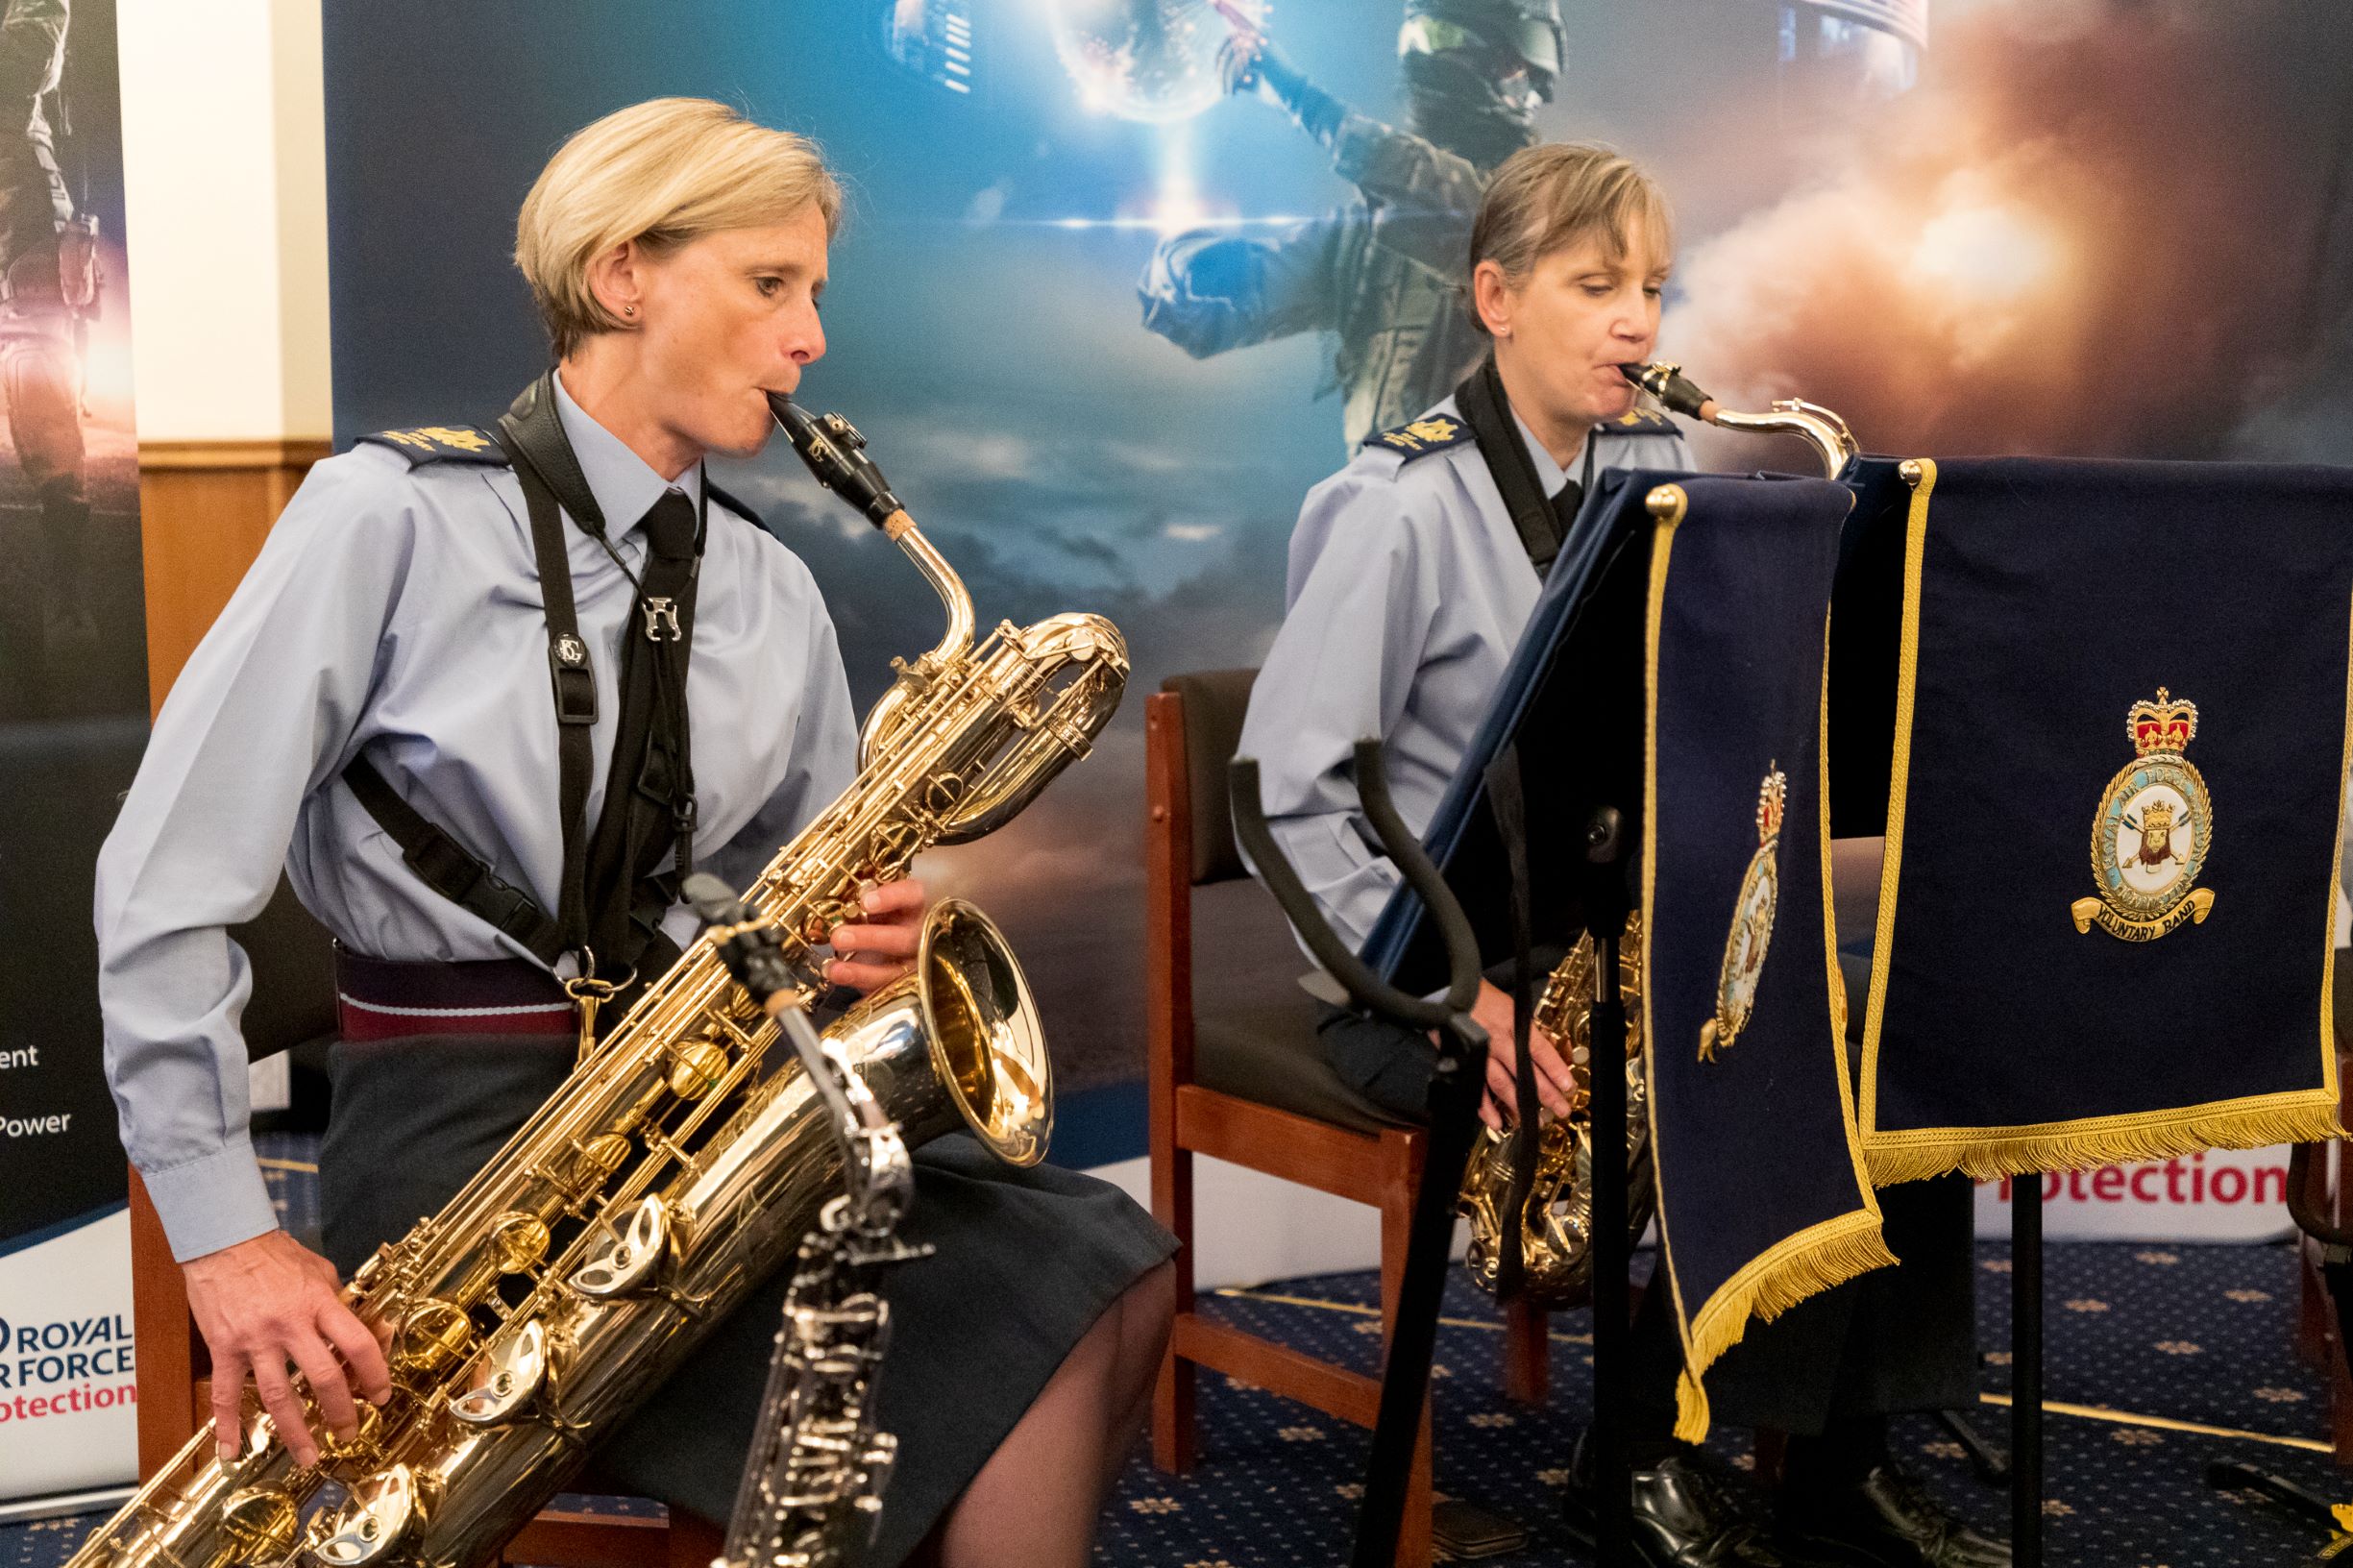 Image shows RAF Band performing indoors.